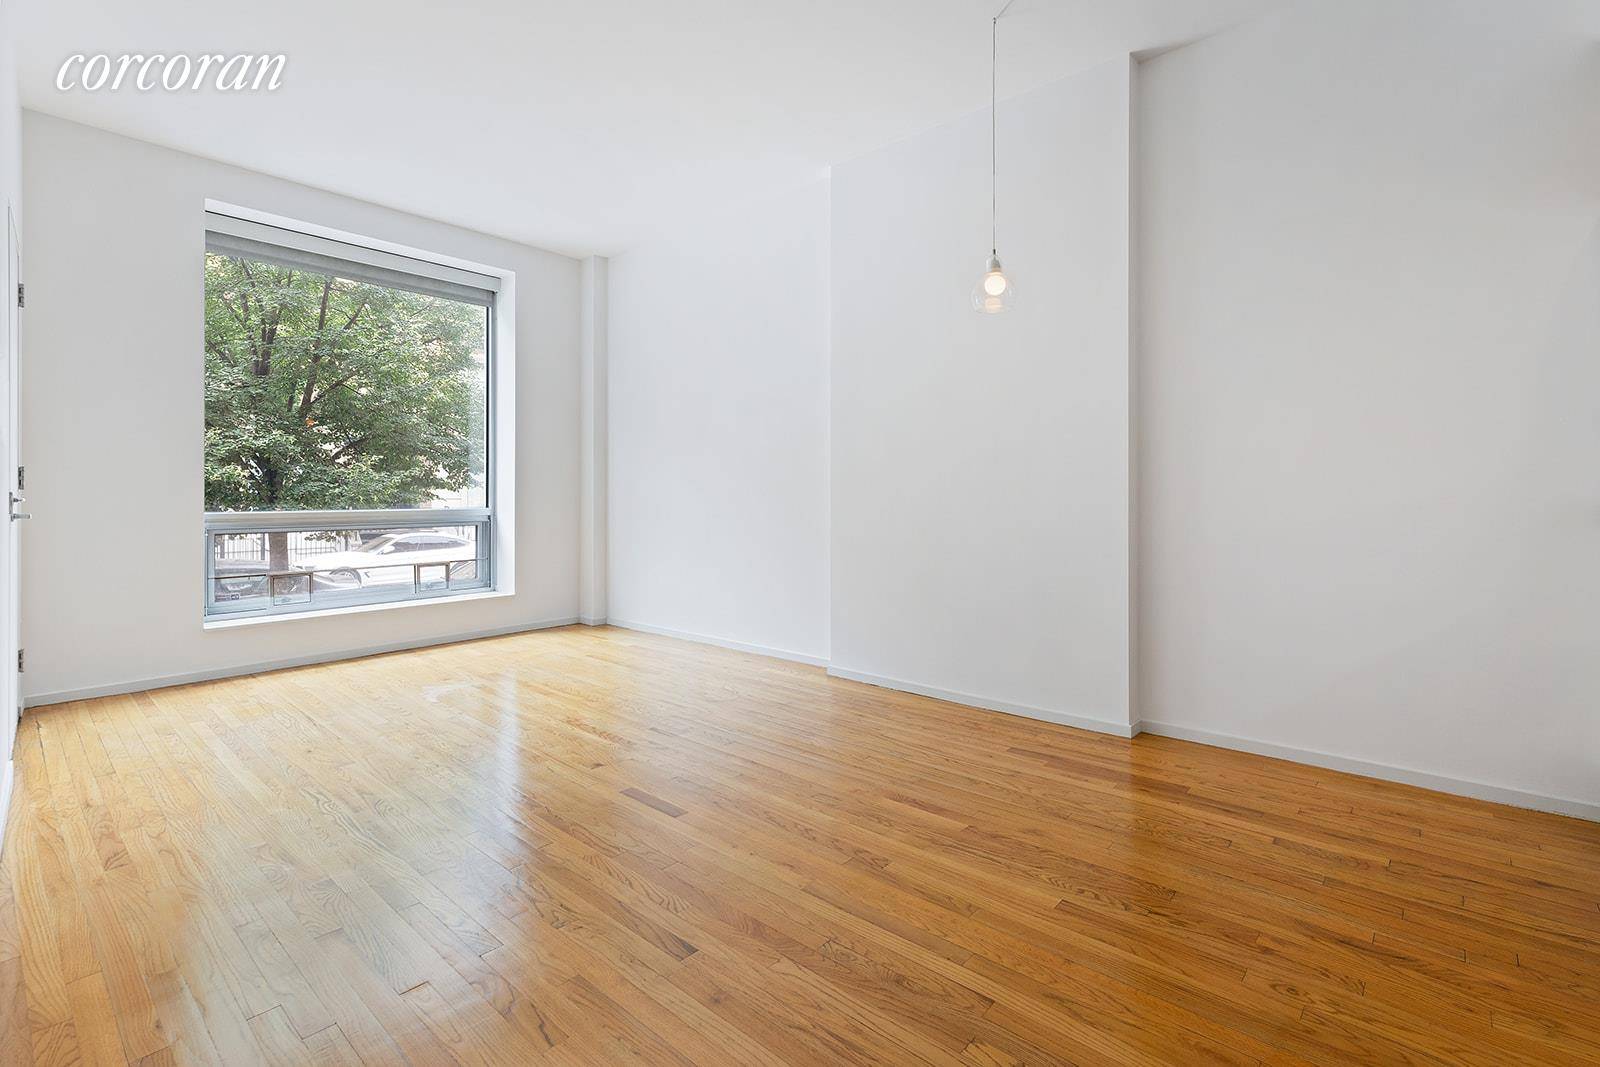 This stunning two bedroom rental is just steps from Morningside Park and a short walk to Central Park.